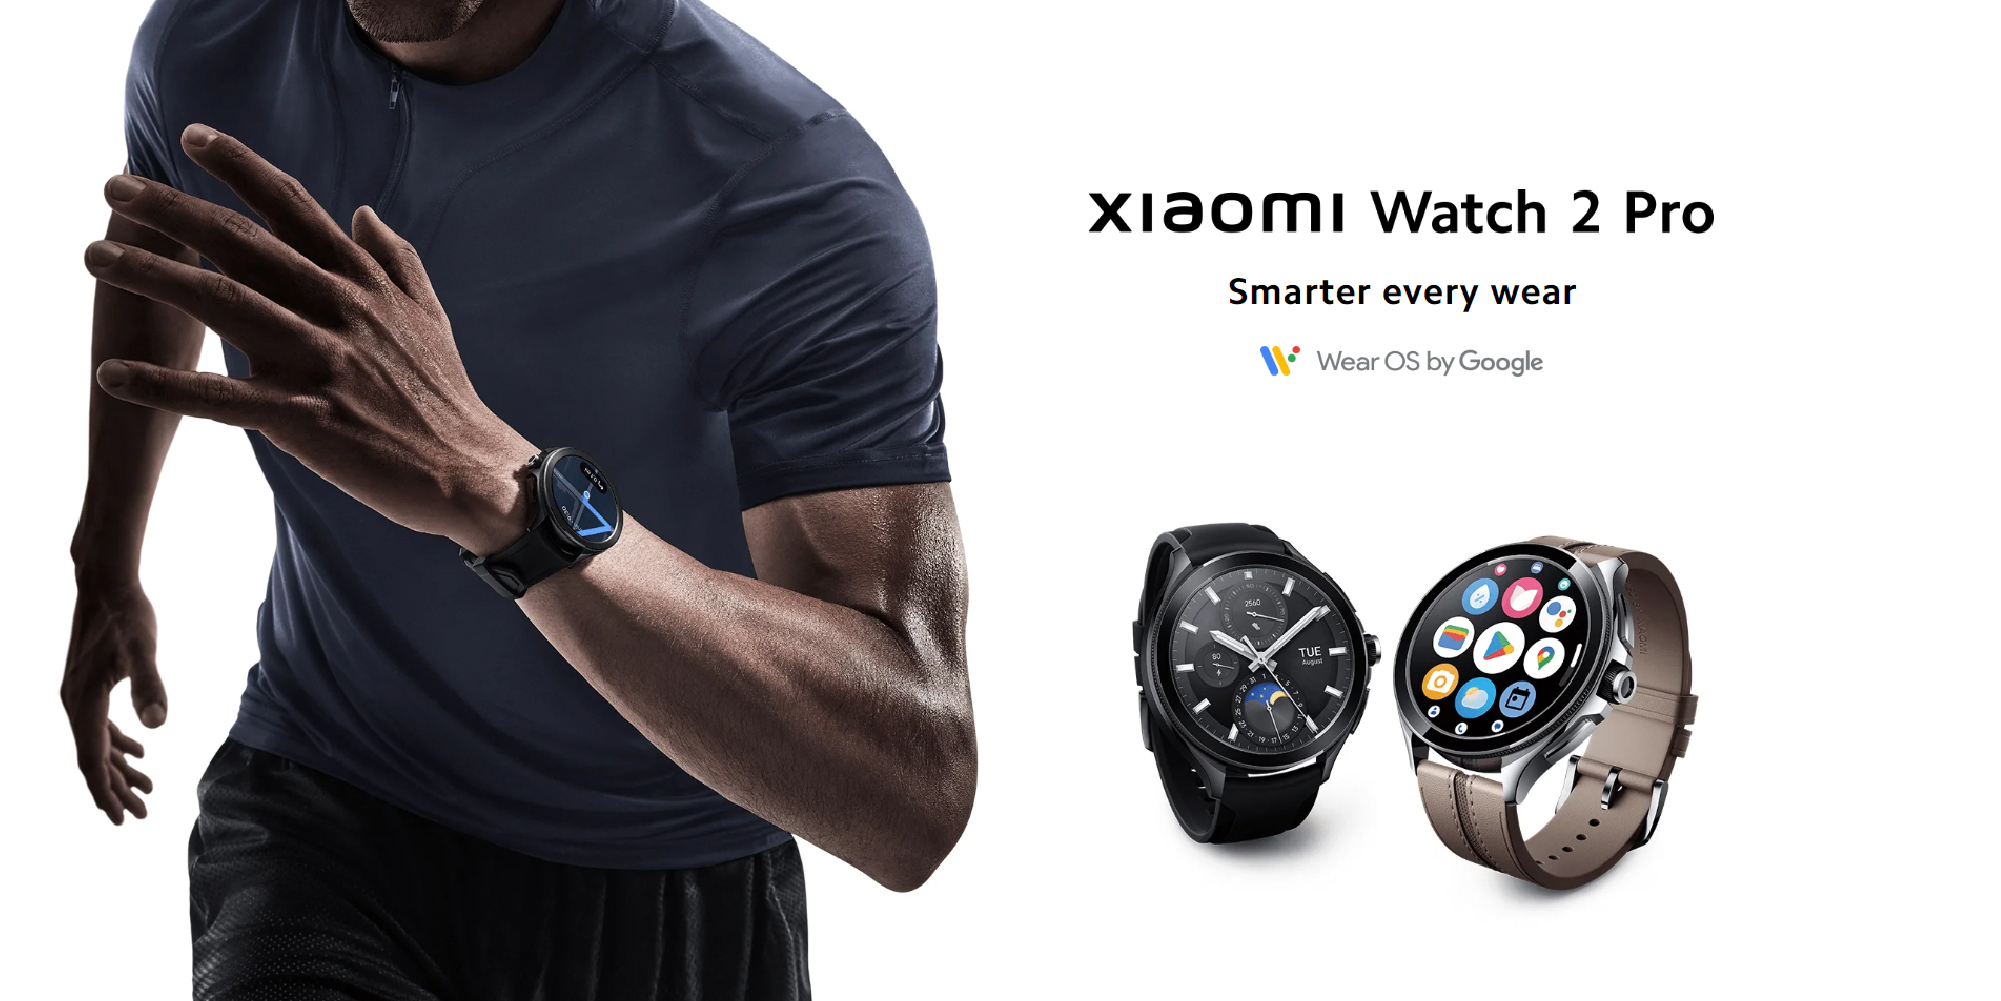 Xiaomi Watch 2 Pro: 1.43" Amoled display, Qualcomm Snapdragon W5+ Gen 1, Heart Rate & Sleep Monitoring, 5ATM Water-resistant, Silver